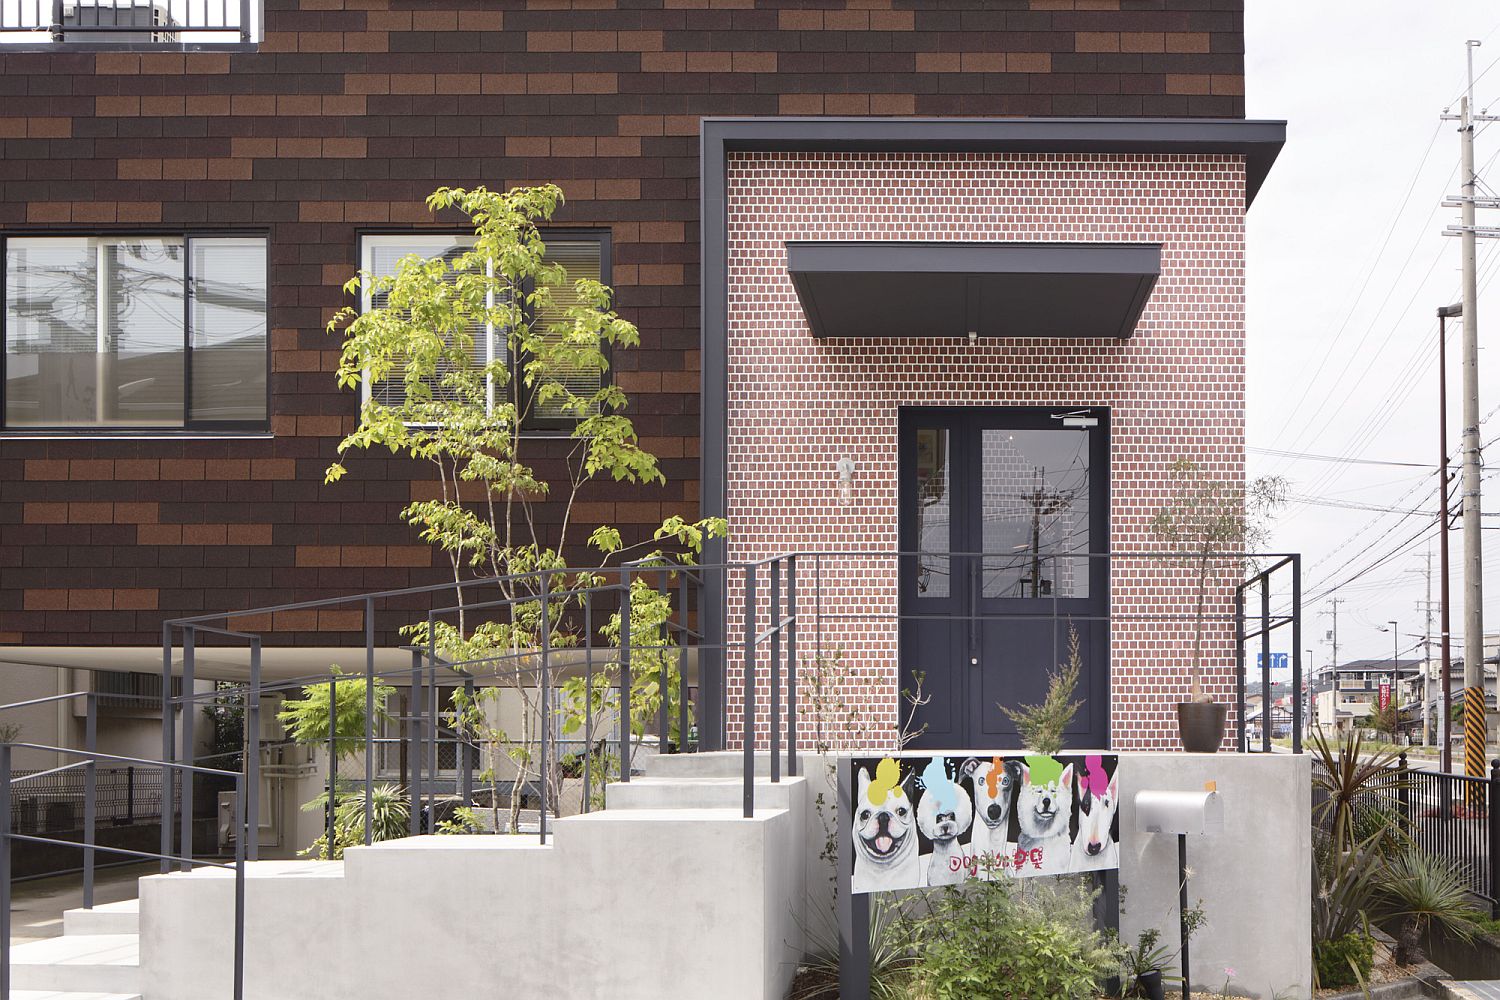 Brick gives the Dog salon a distinct street facade that sets it apart from the crowd